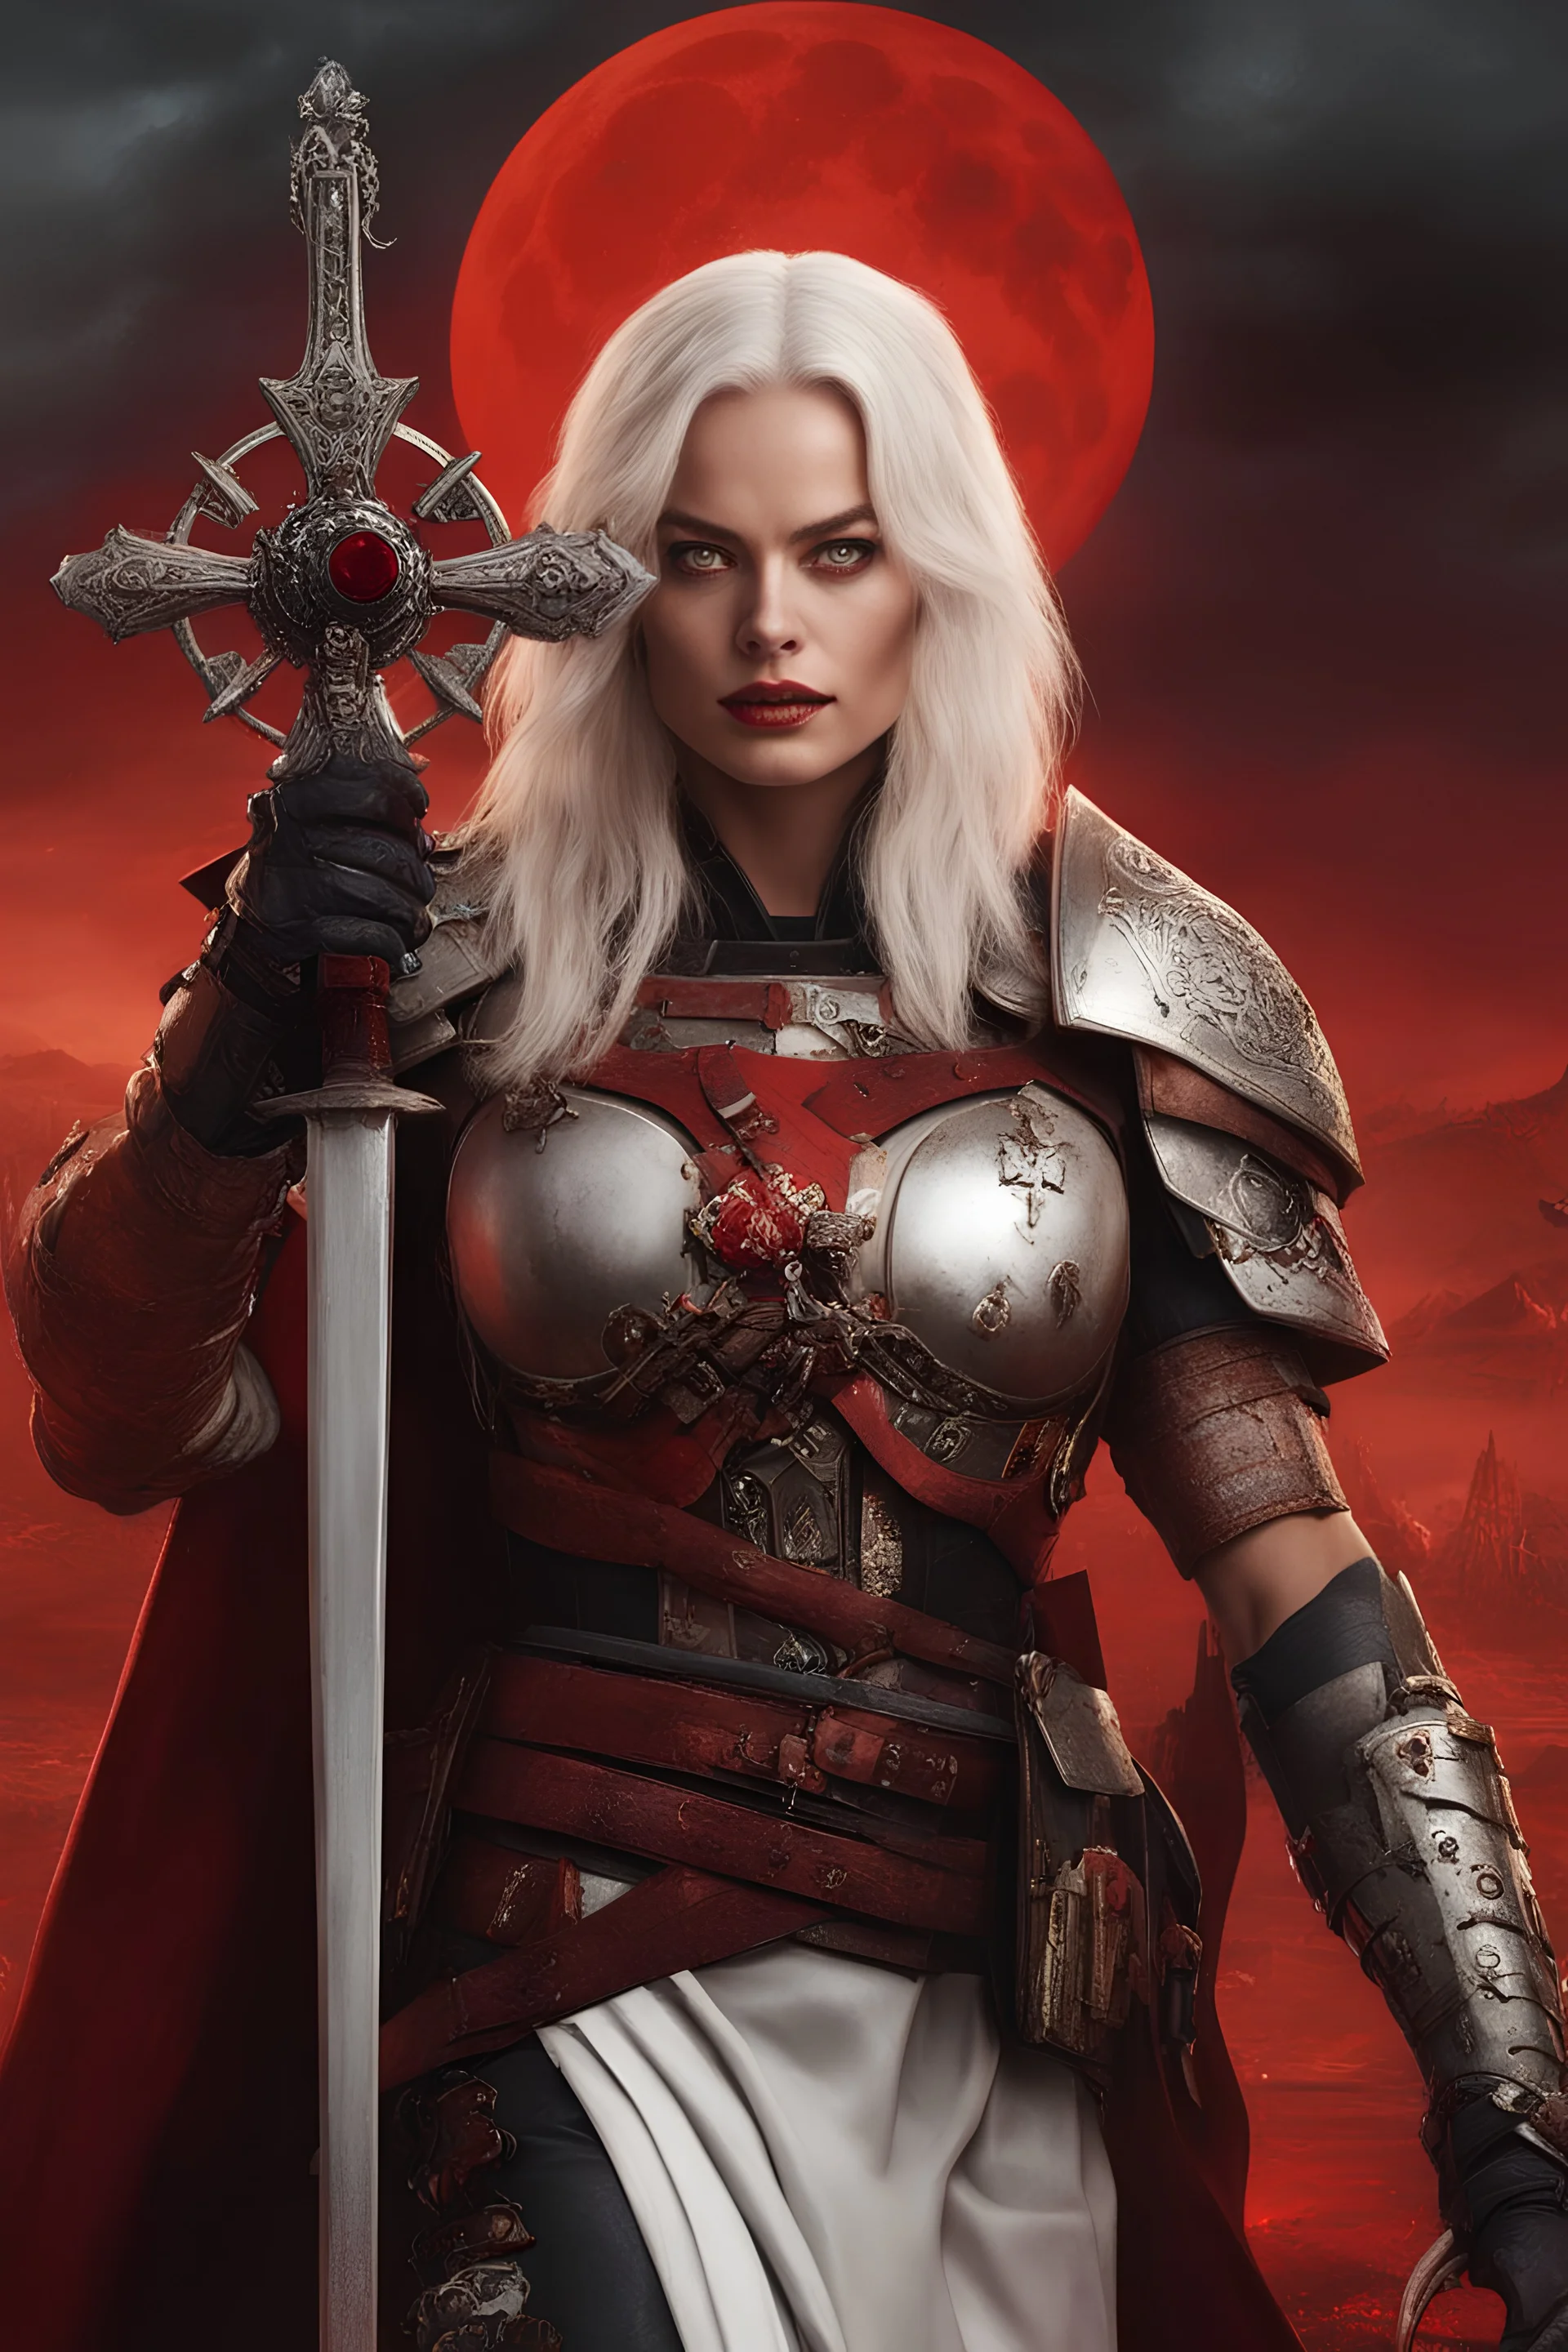 beautiful margot robbie as a sister of battle, warhammer 40k, messy white hair, pale eyes, sadistic, dressed in a revealing bloody armor with long skirt, crucifix, holy symbols, standing on a bloody battlefield, blood moon in the background, sci-fi, confident, highly detailed face, very high resolution